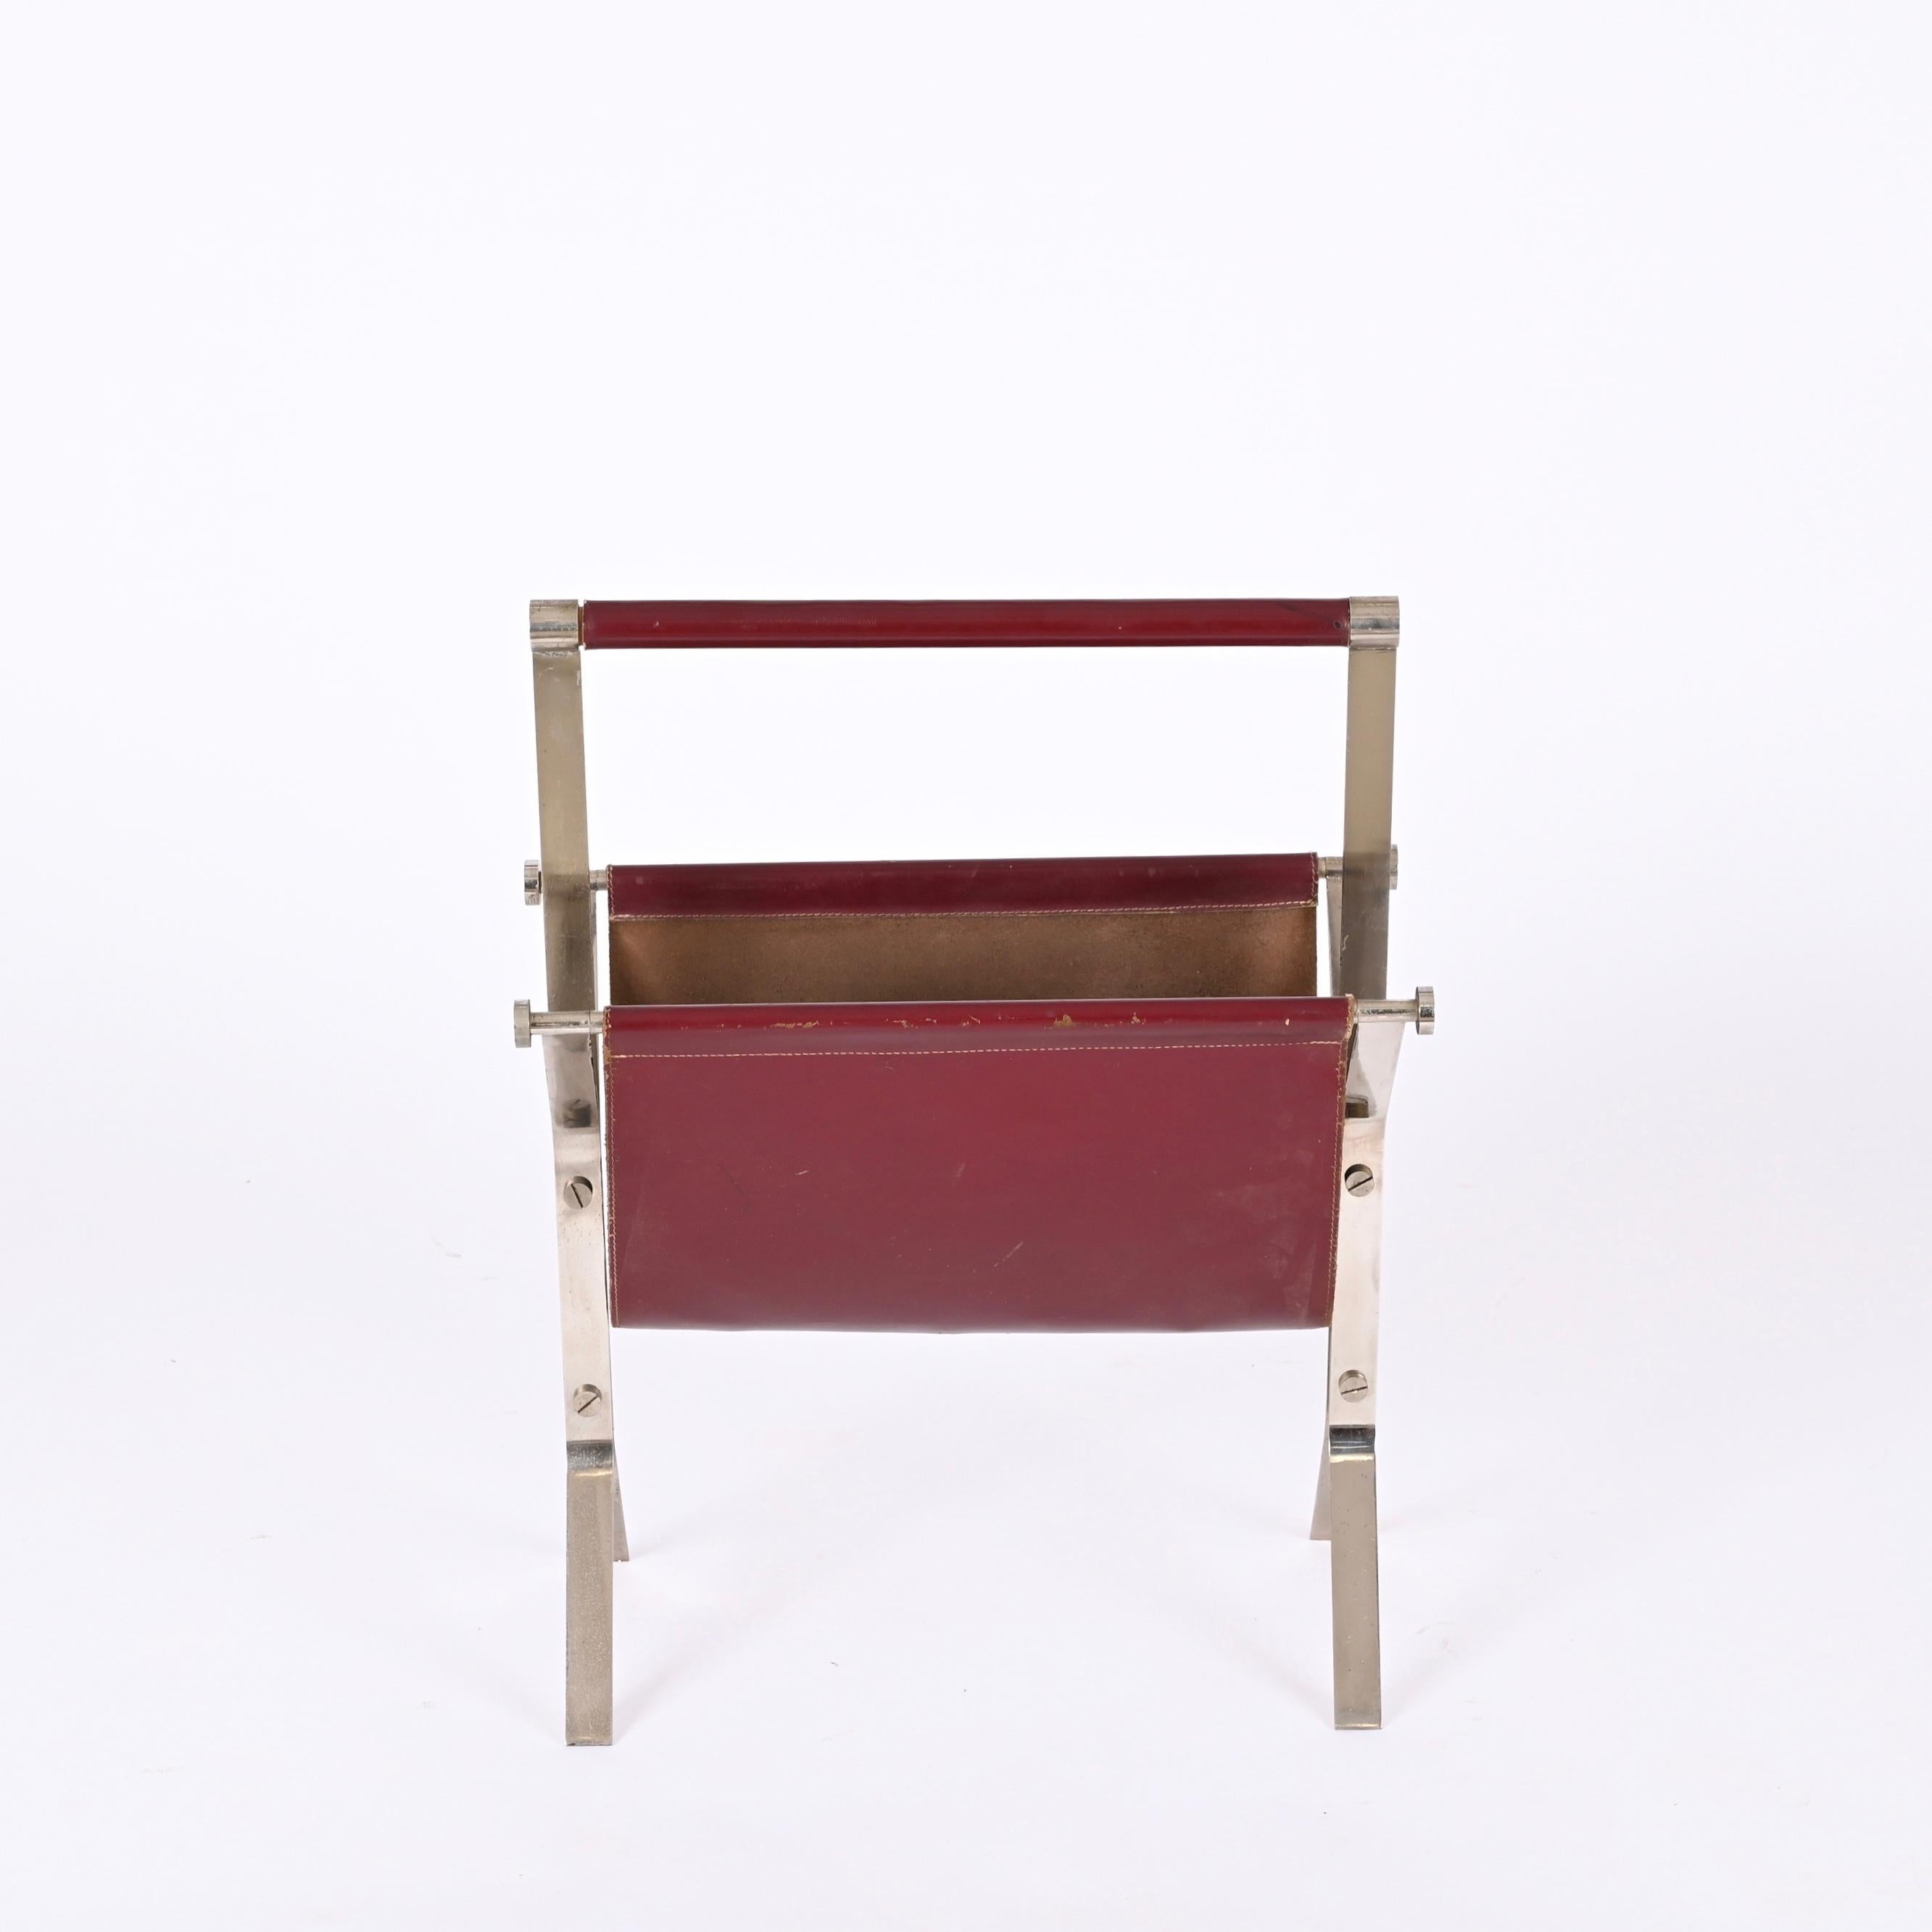 Alessandro Albrizzi Midcentury Chromed Steel and Red Leather Magazine Rack 1970s For Sale 2